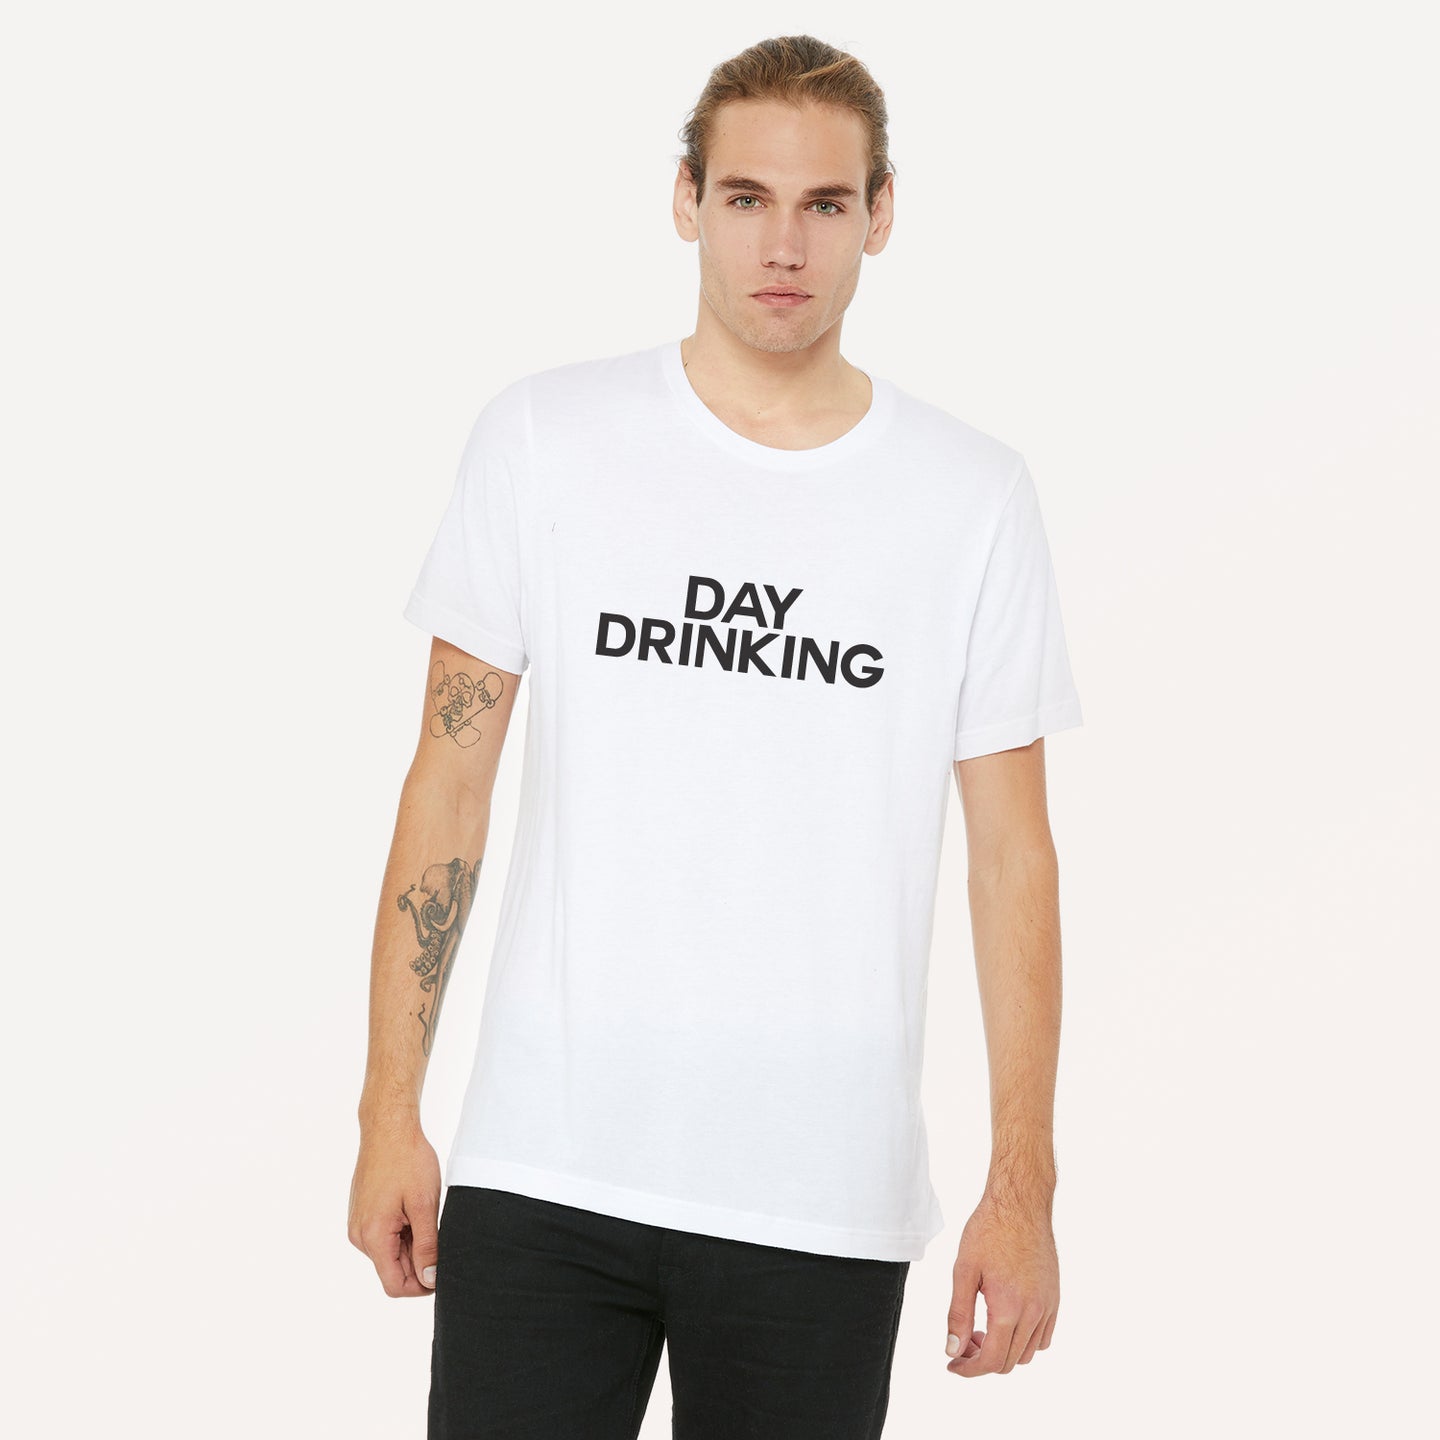 Day Drinking graphic screenprinted in black on a white unisex soft cotton jersey t-shirt.